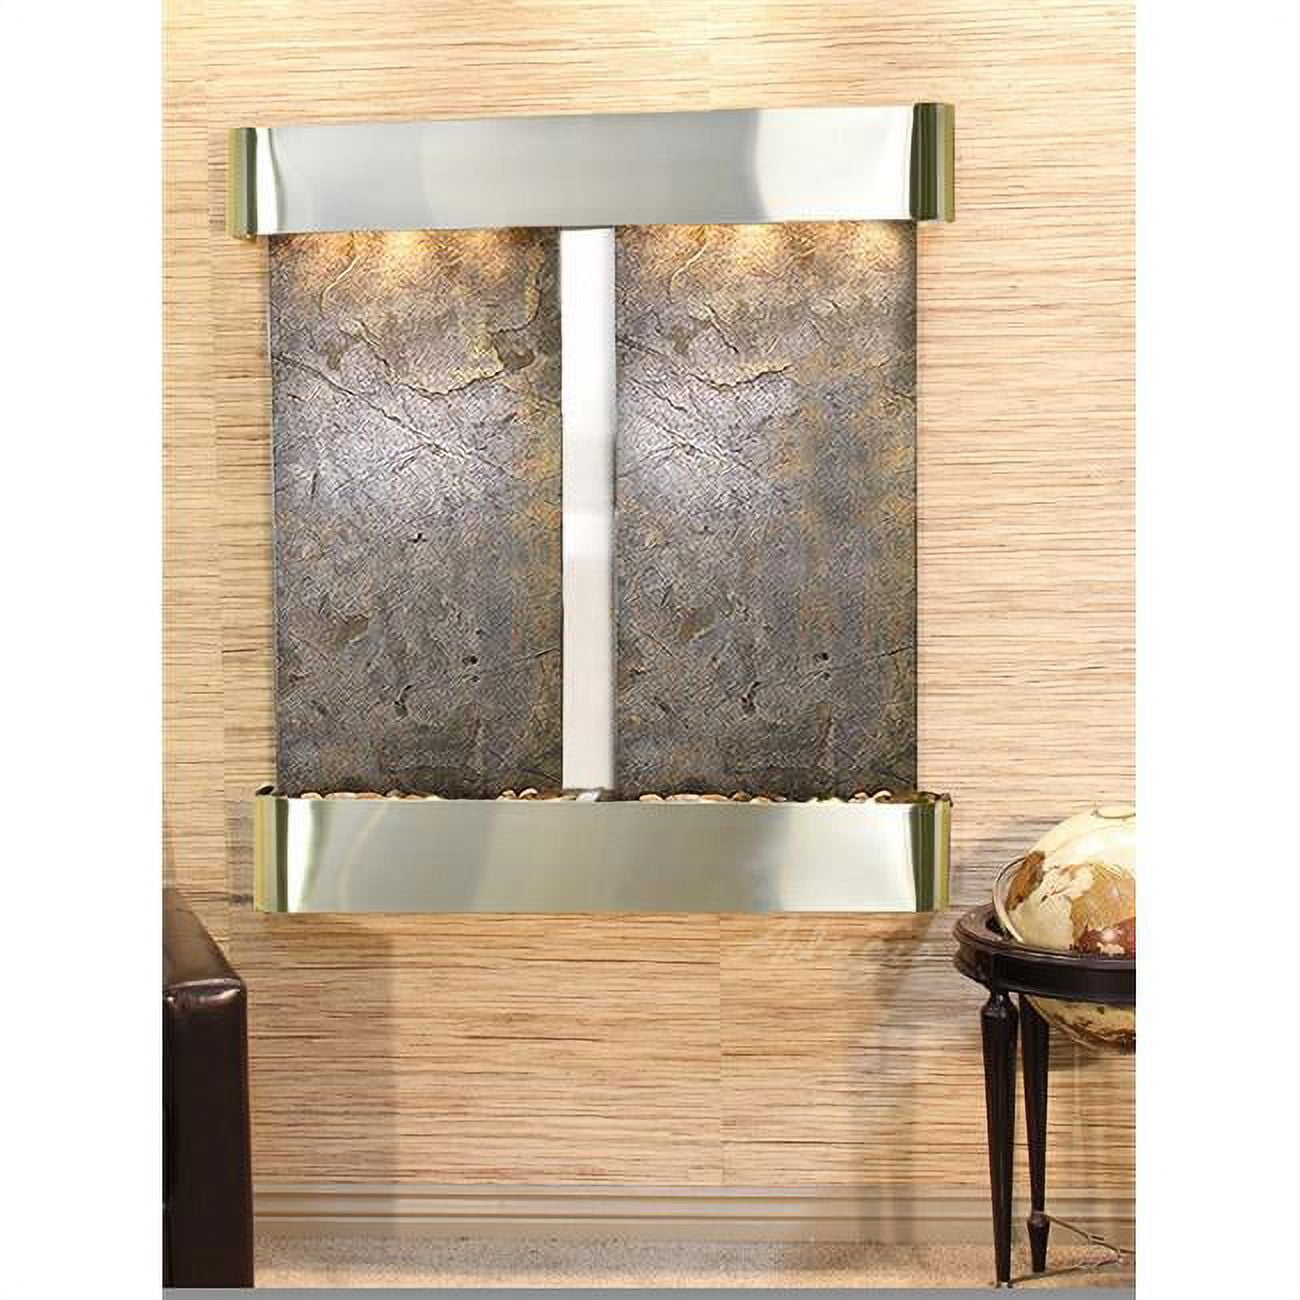 Picture of Adagio AFR2012 Aspen Falls Round Wall Fountain - Stainless Steel-Green Featherstone